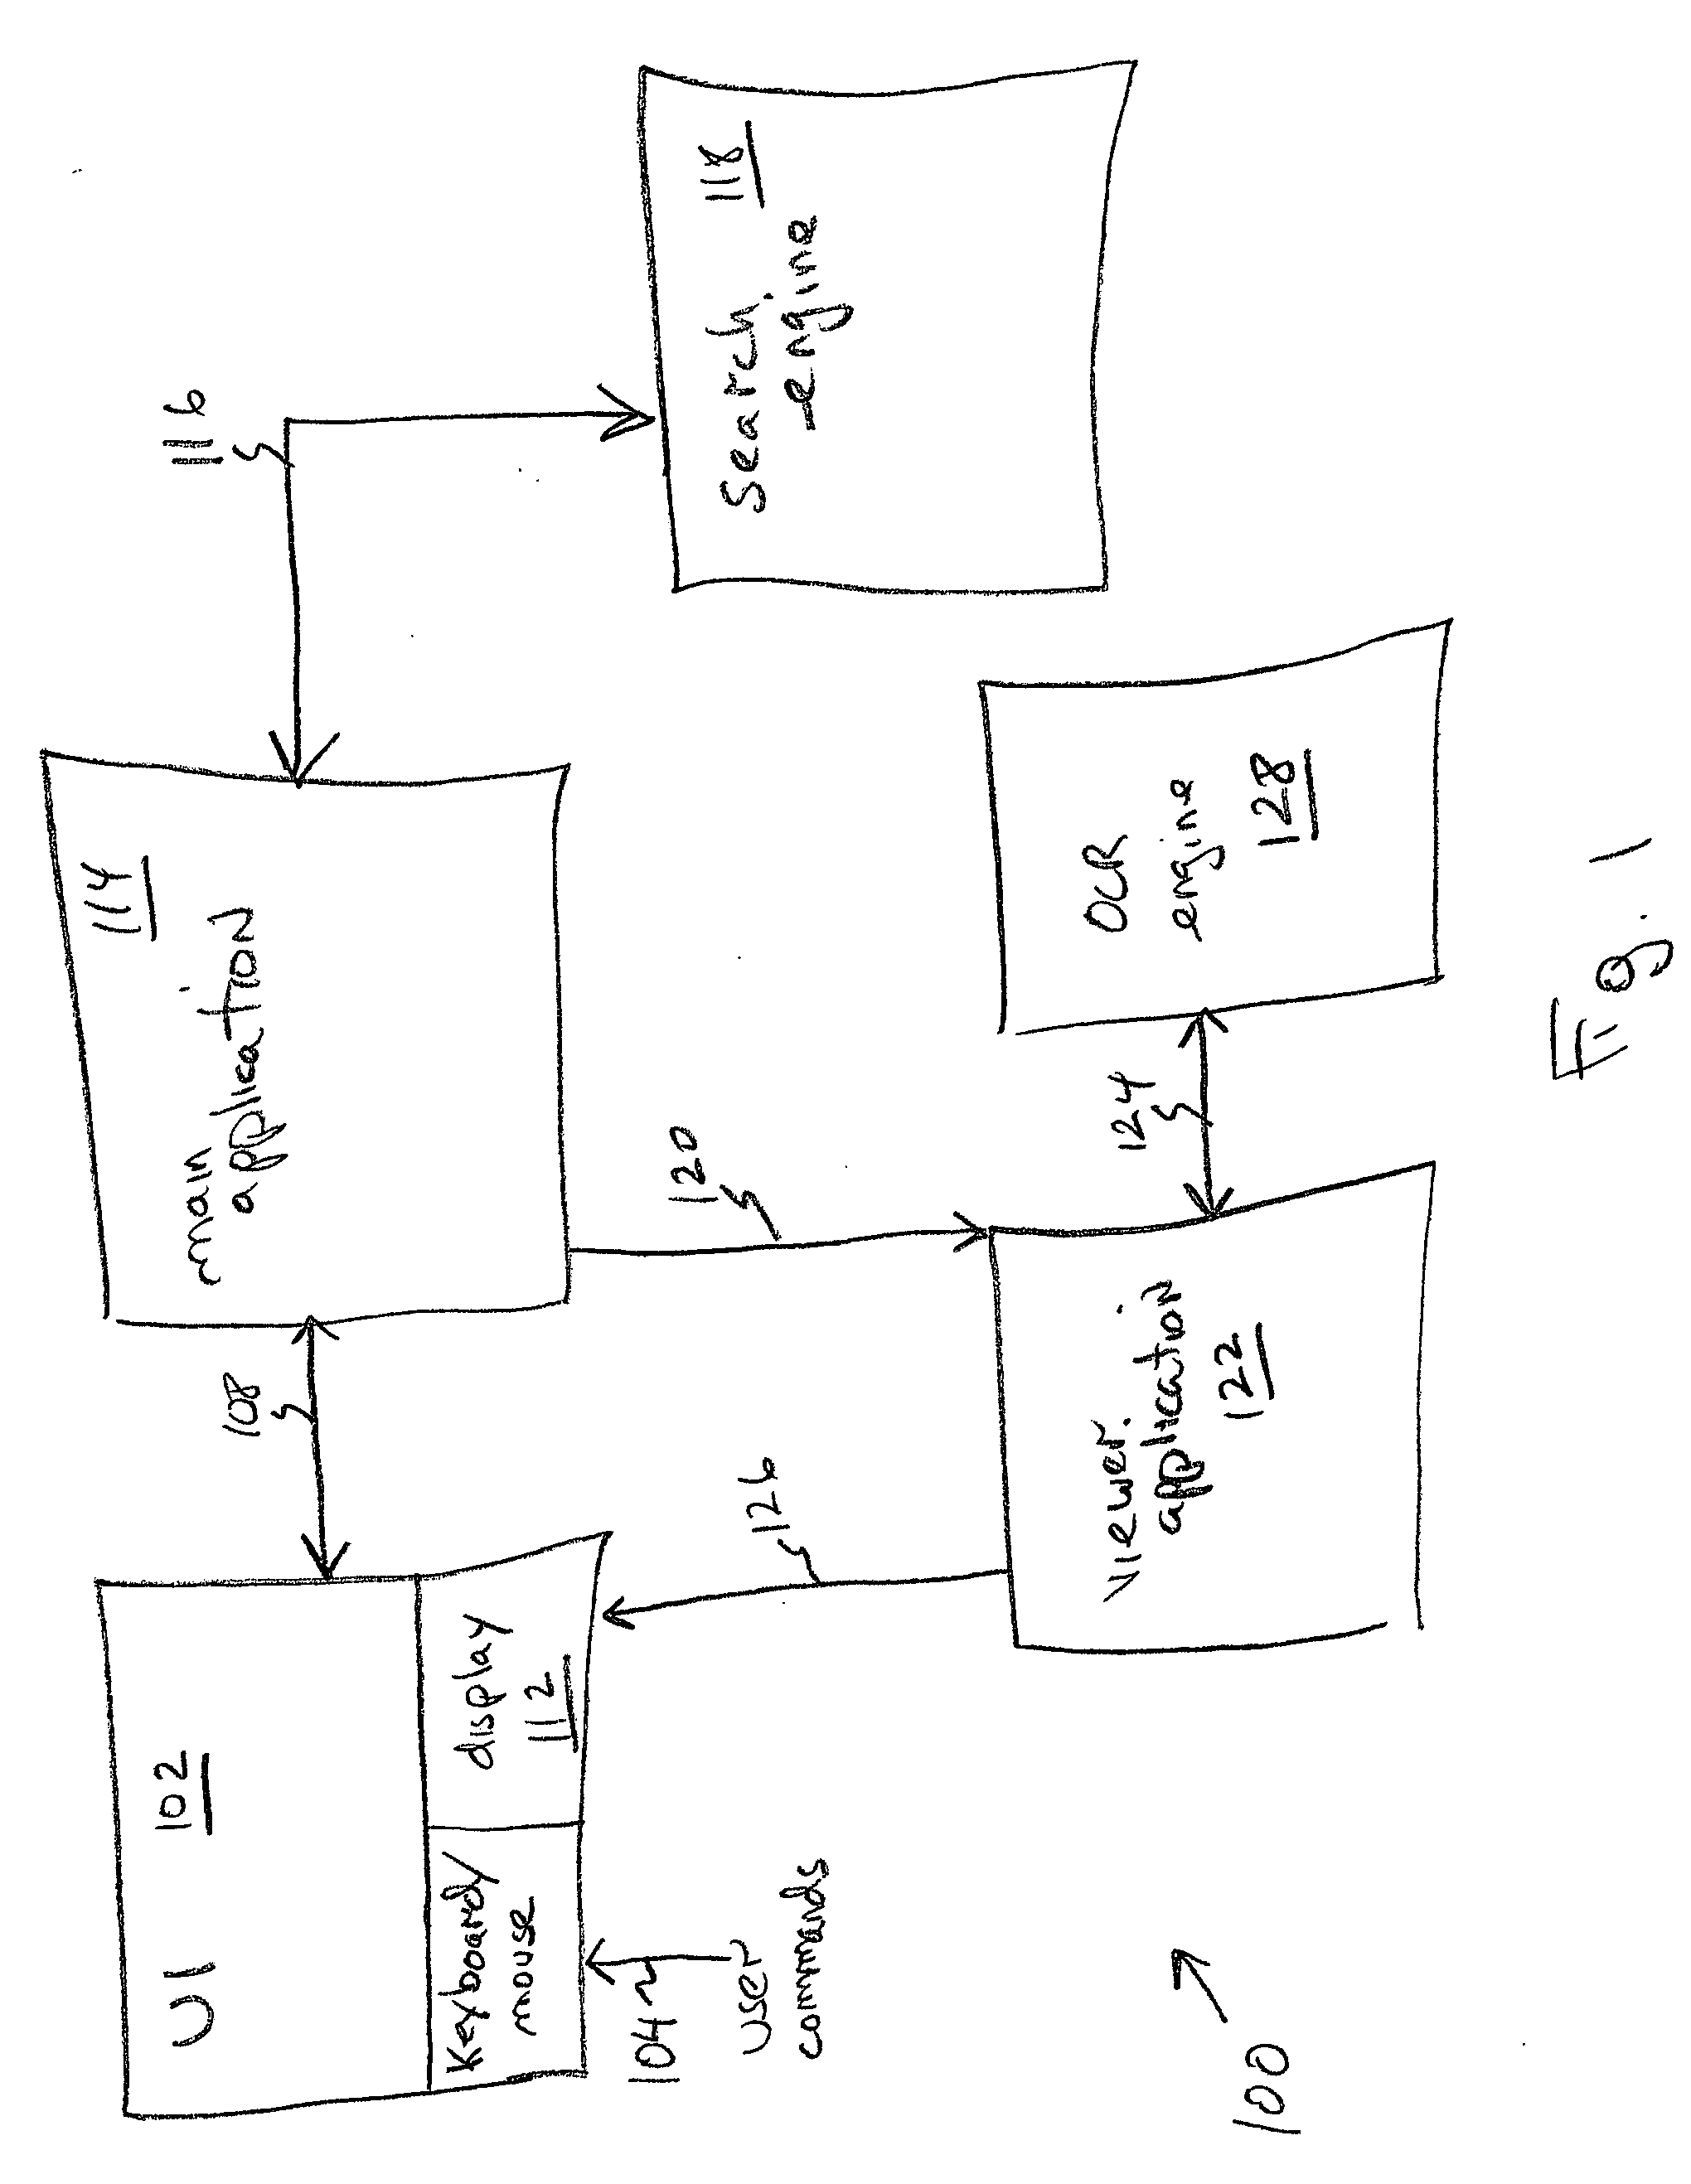 System and method for automatically locating searched text in an image file